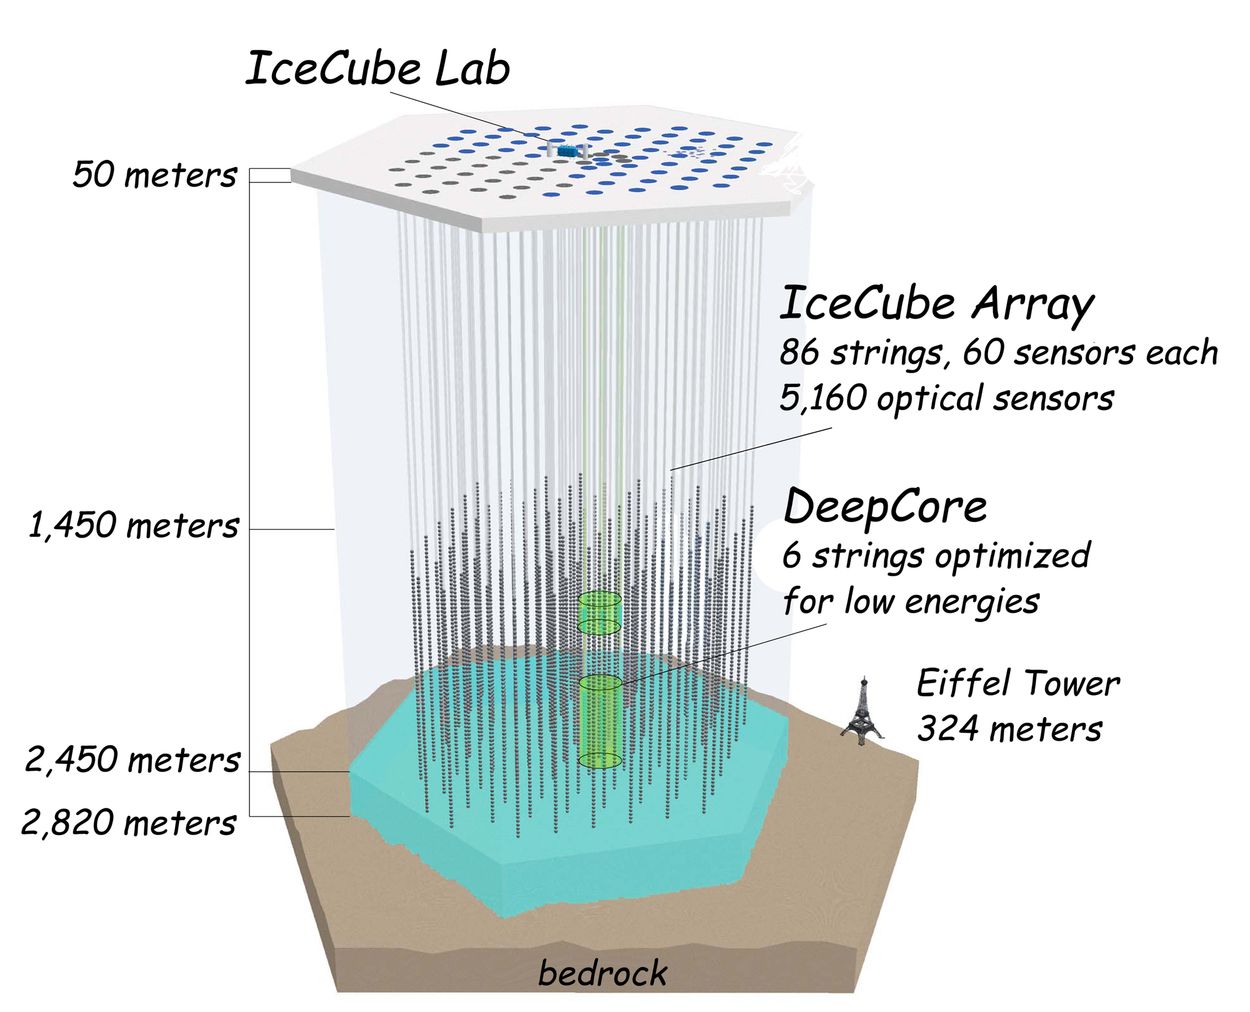 Fig. 1: The layout of IceCube.  At the surface is the IceCube Lab and "IceTop", a set of detectors whose purpose will be explained later. In 2.5 kilometer-log holes (now frozen solid) are placed long strings, with light-sensitive detectors in the bottom kilometer.